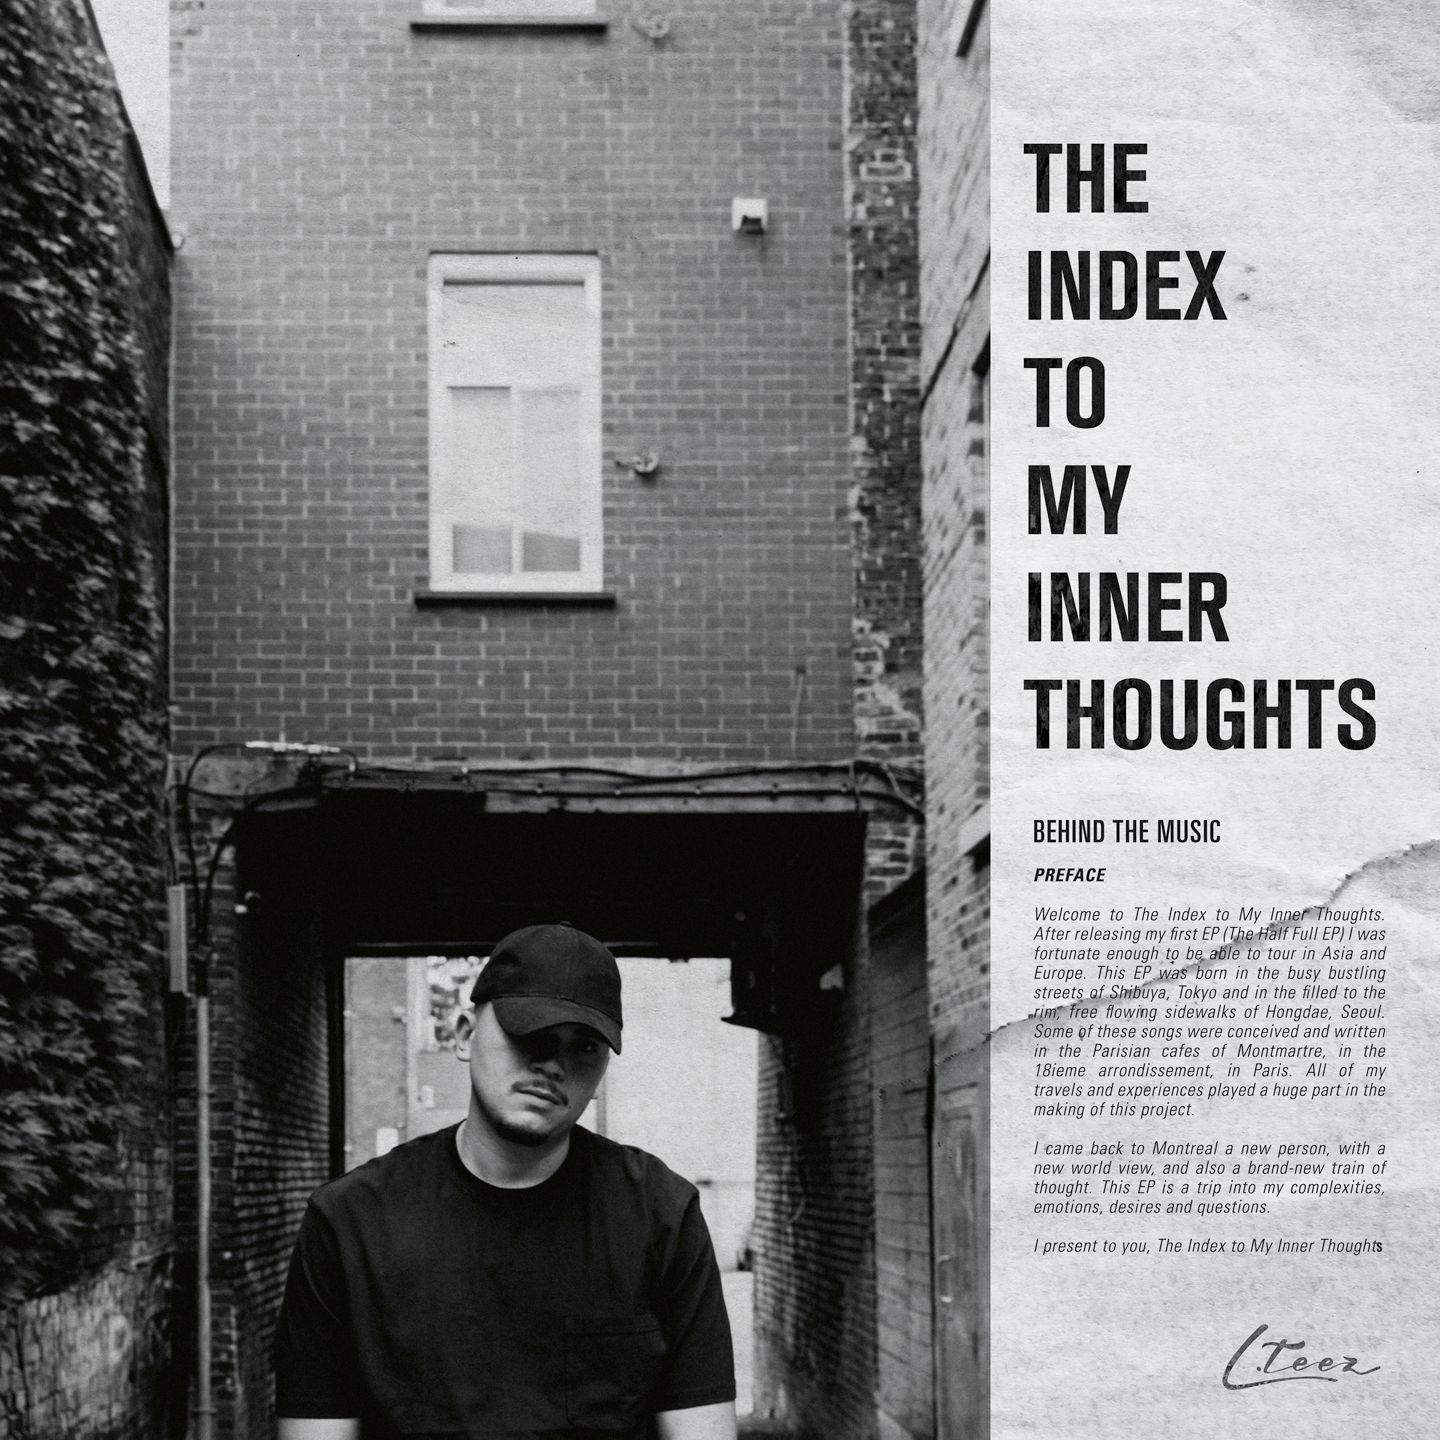 L. Teez, jazz rap e introspezione nel nuovo ep “The Index To My Inner Thoughts”